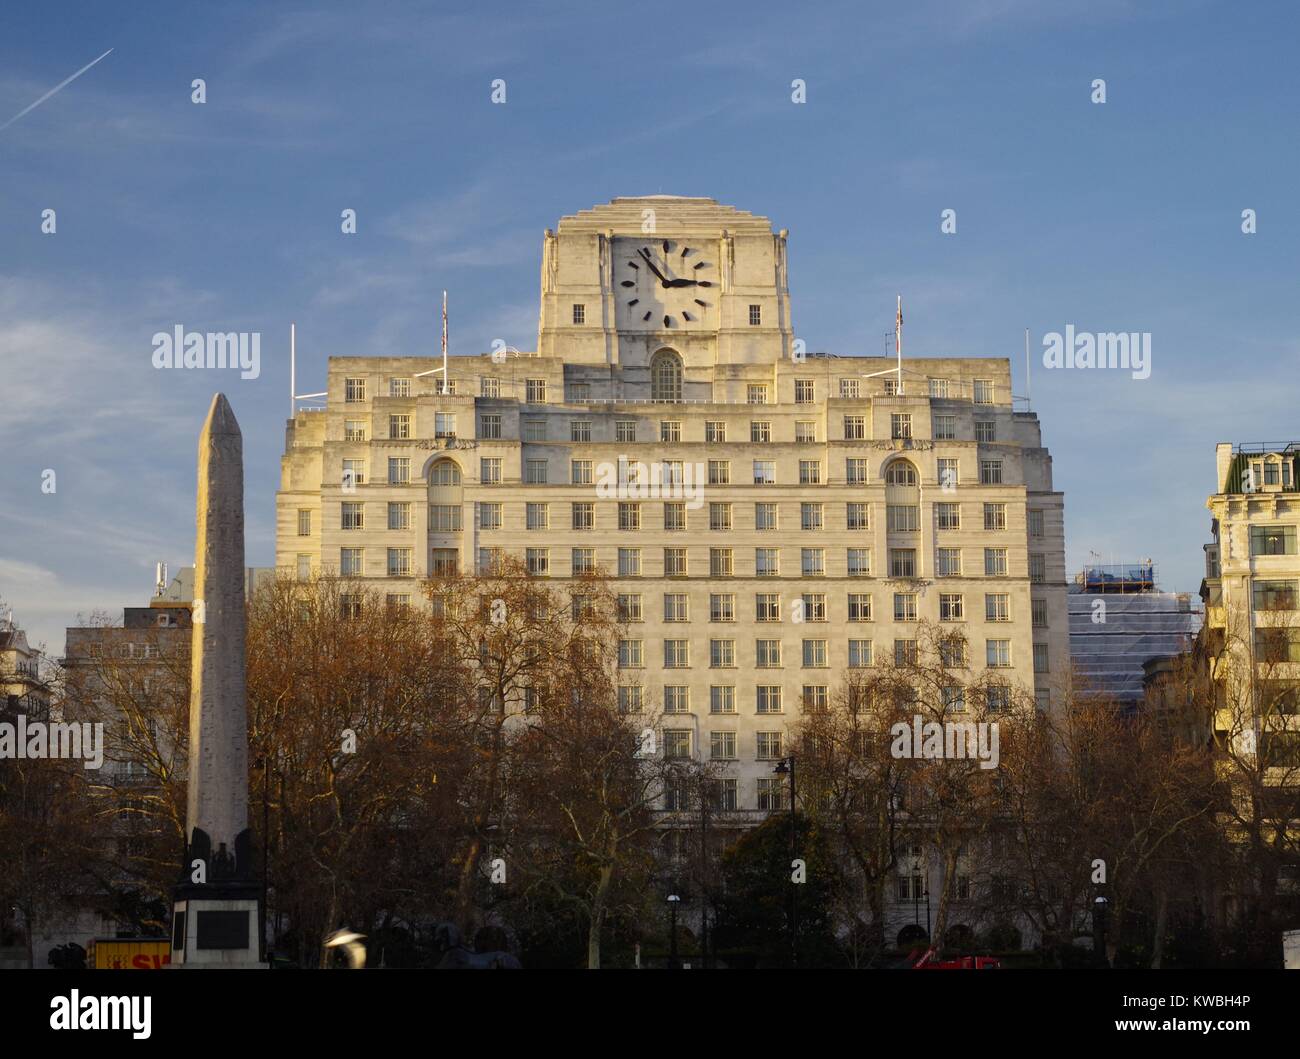 The Shell Mex Art Deco Building and Cleopatra's Needle. Victoria Embankment, City of Westminster, London, UK. In Golden Afternoon Sunlight. Dec 2017. Stock Photo